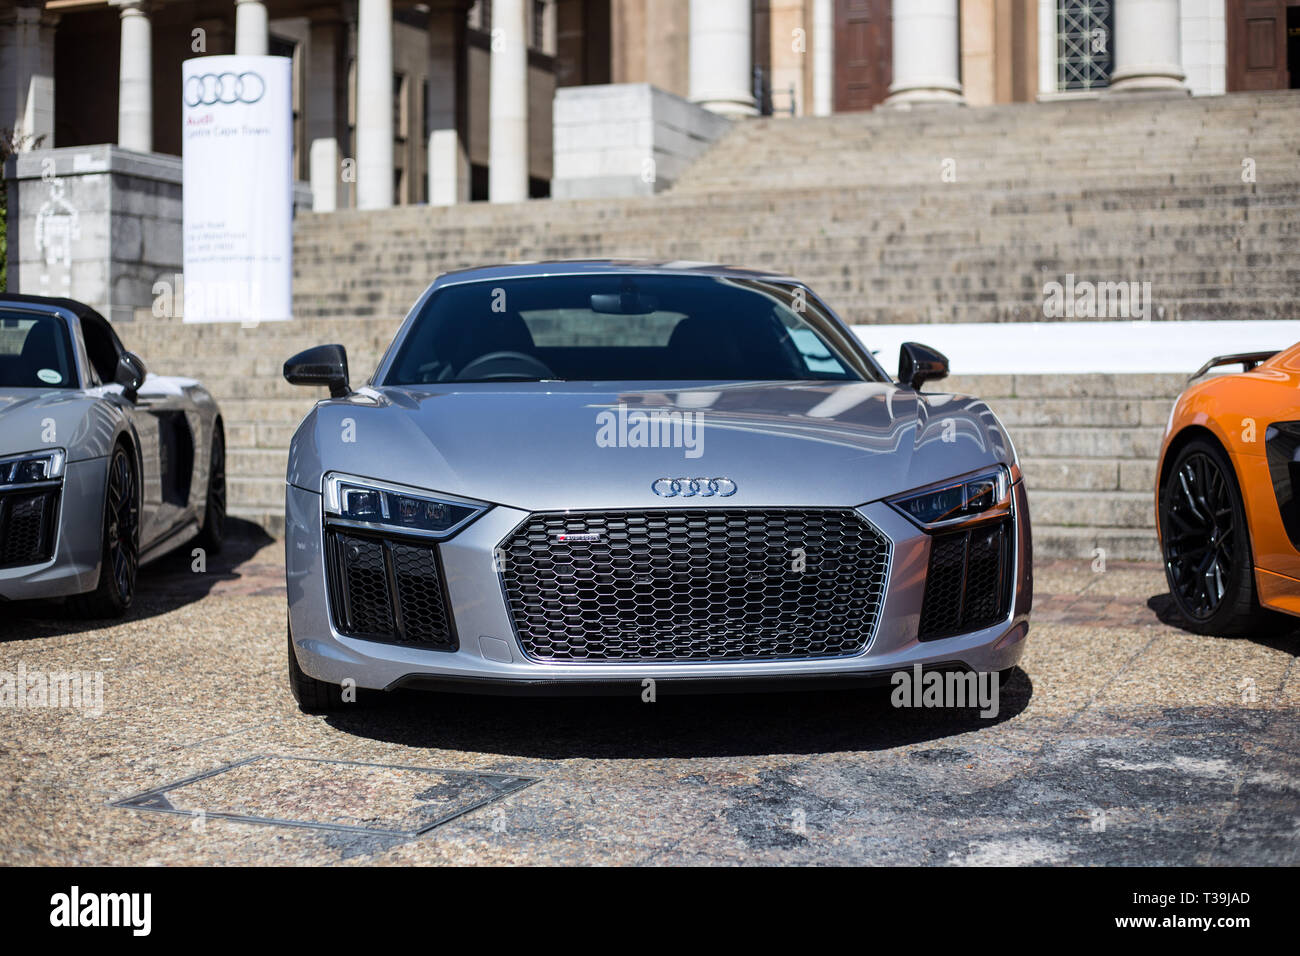 Cape Town, South Africa. 3 April 2019. A silver Audi r8 sports car. Stock Photo